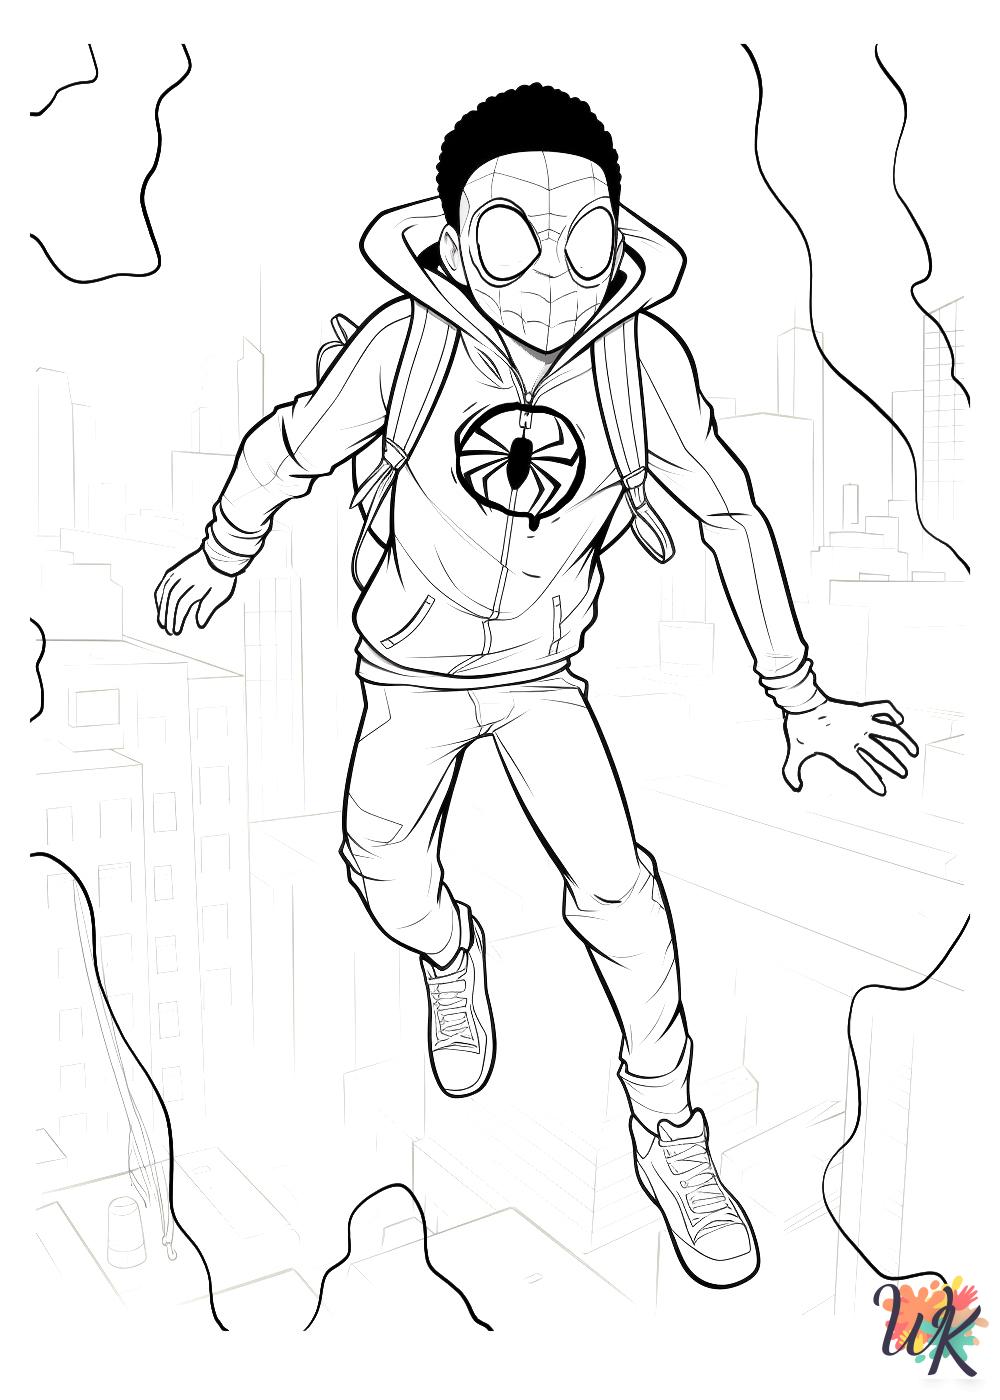 Miles Morales coloring pages for kids